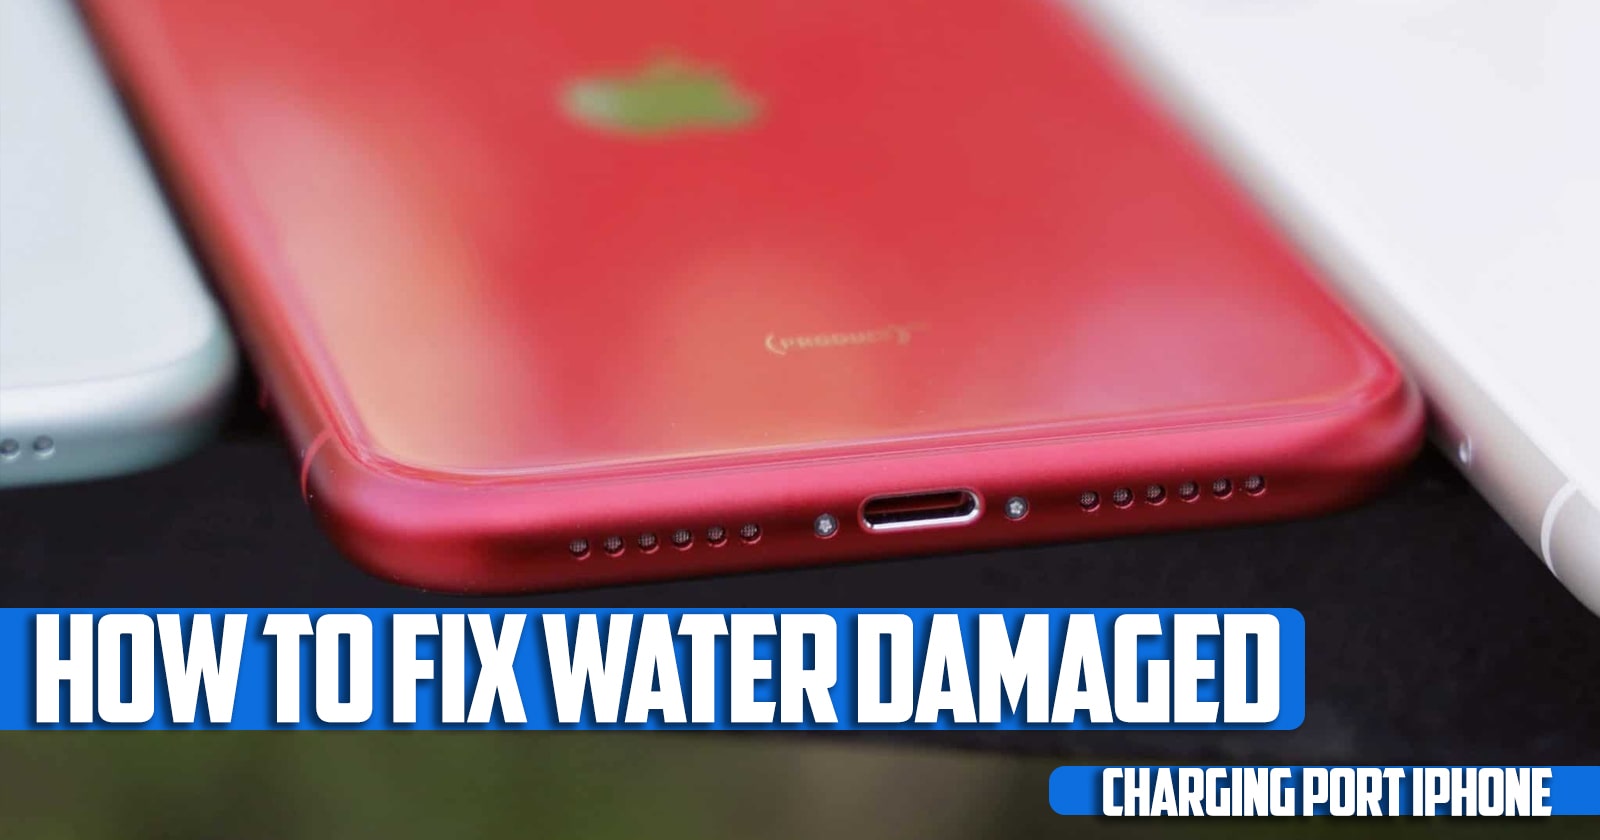 How to Fix Water Damaged Charging Port iPhone